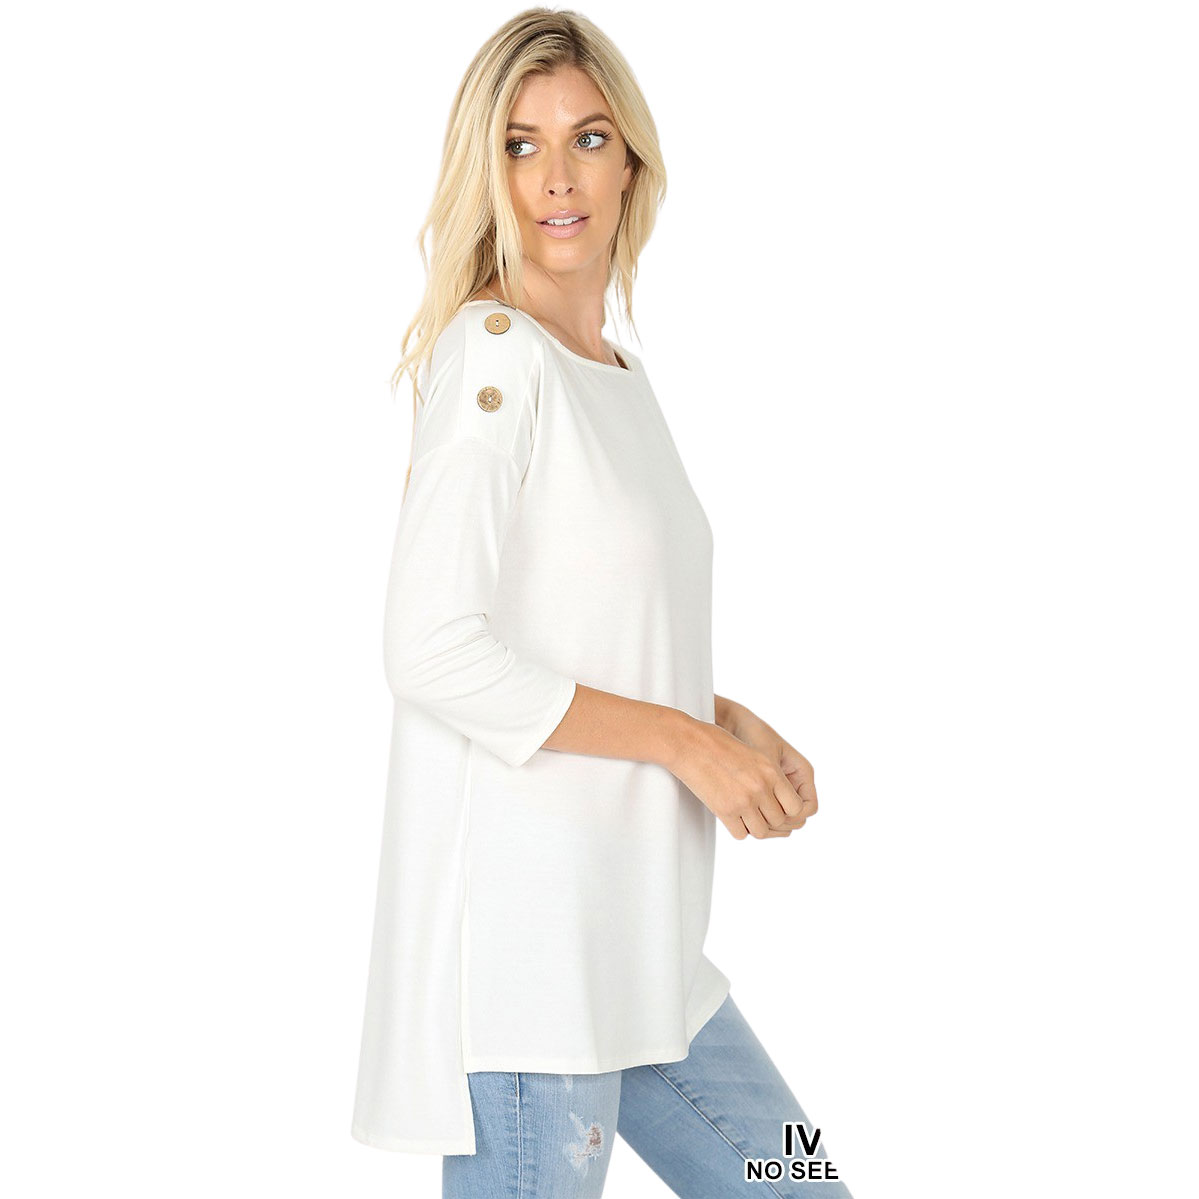 2082 - Boat Neck Hi-Lo Tops w/Wooden Buttons Ivory Boat Neck Hi-Lo Top w/ Wooden Buttons 2082 - X-Large